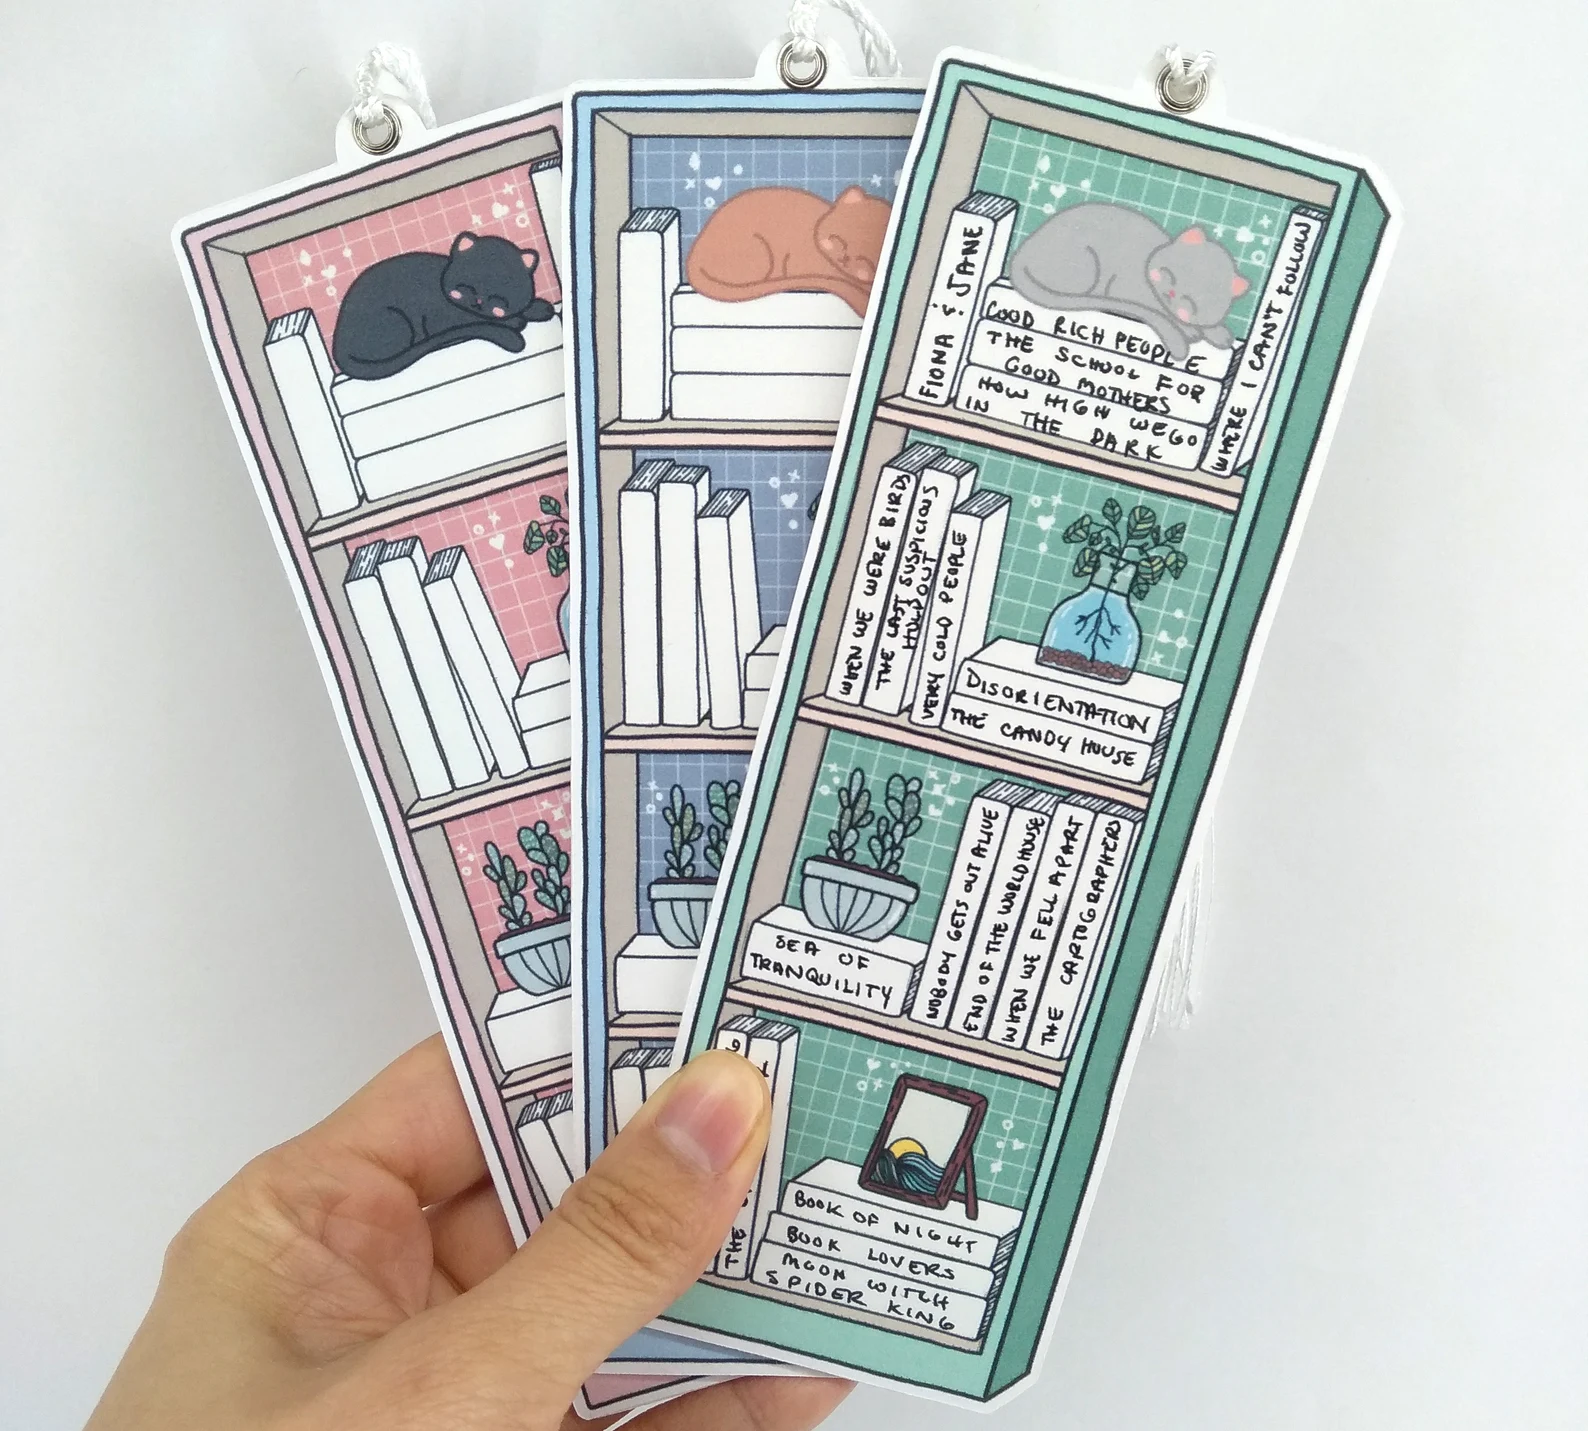 Three bookmarks depicting a bookshelf with books with blank spines and sleeping cats